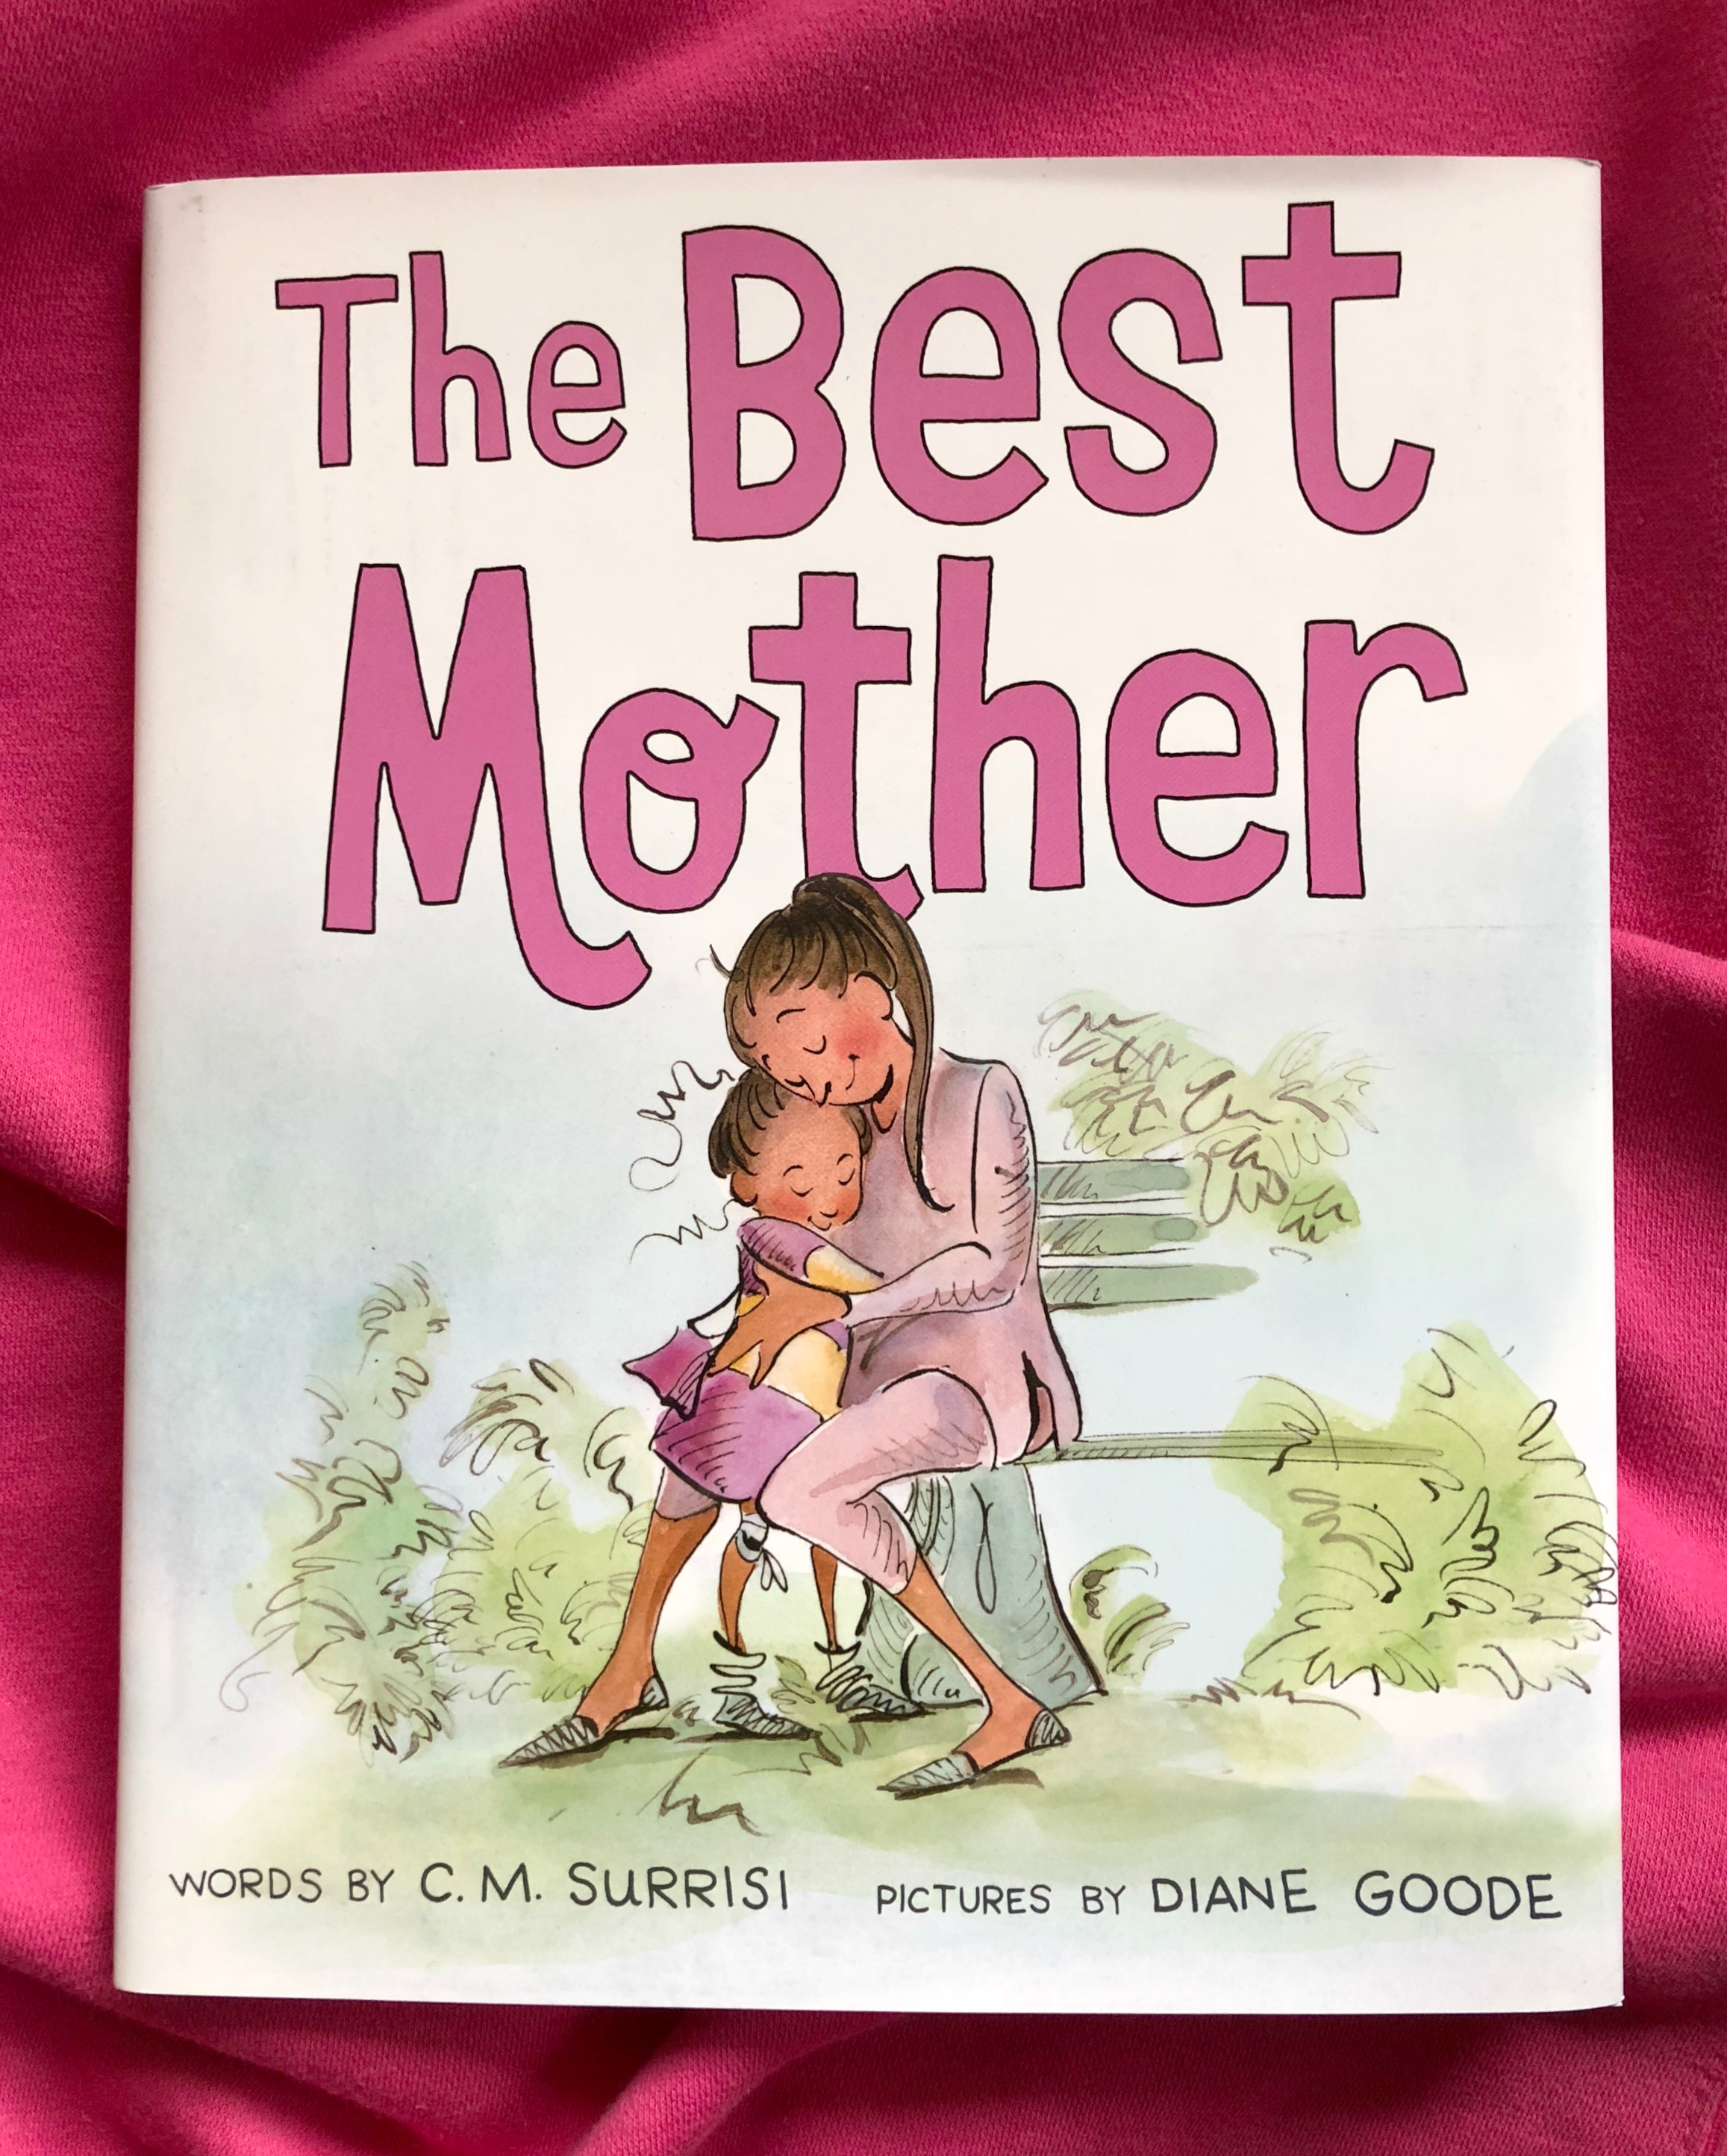 Good books for c. Good mother. Best мама. For the best mother. The best mother’s Day ever.